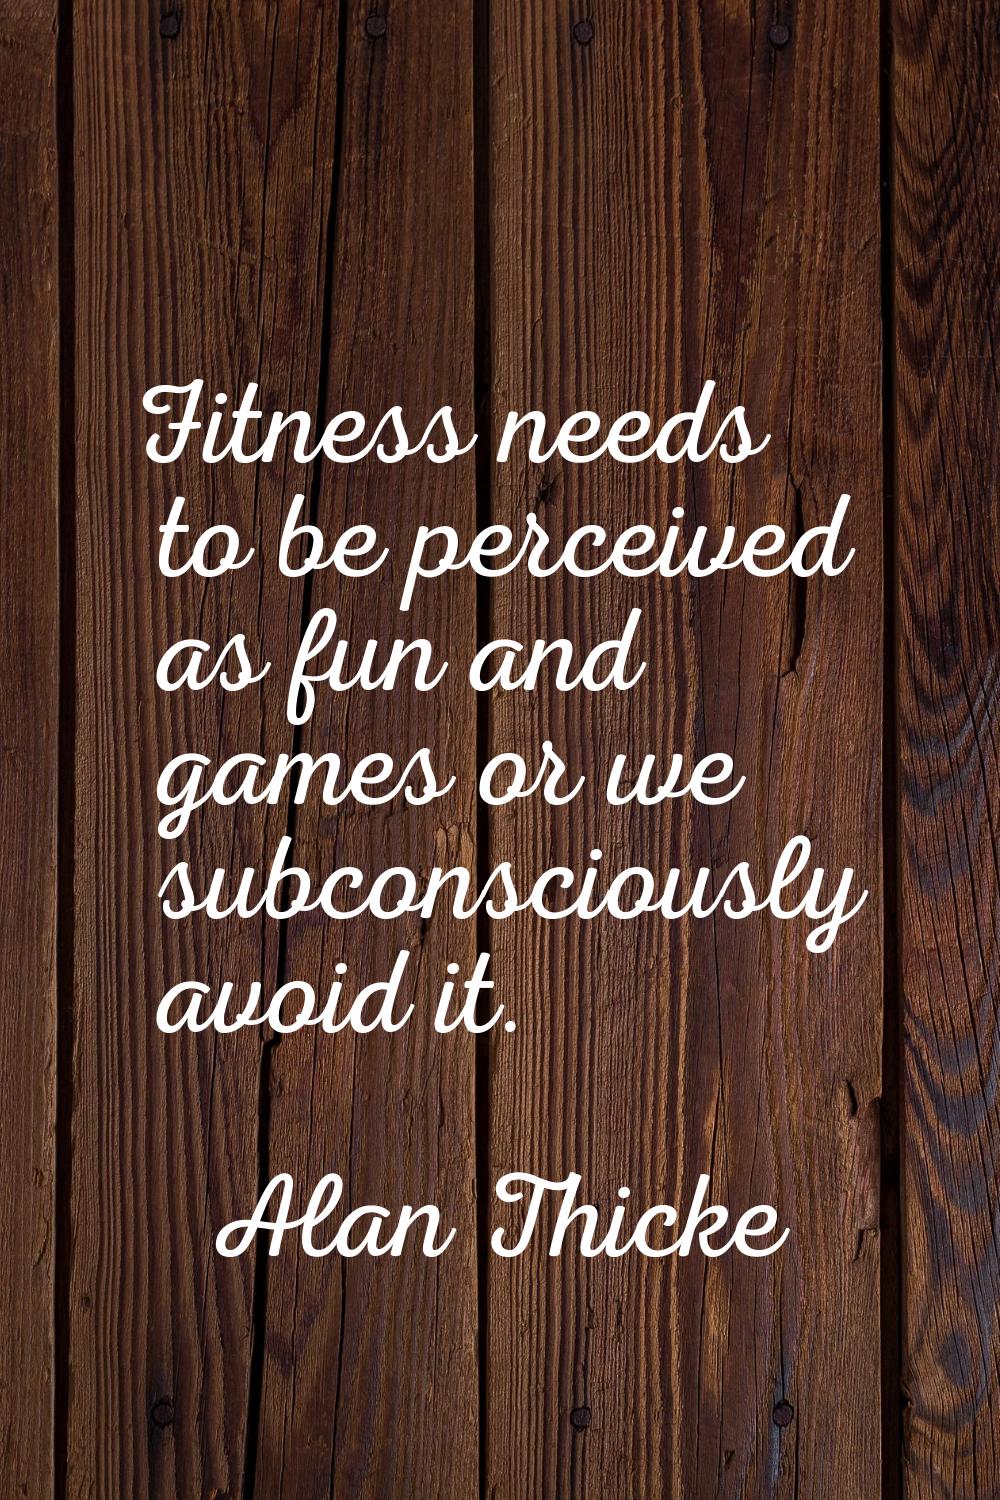 Fitness needs to be perceived as fun and games or we subconsciously avoid it.